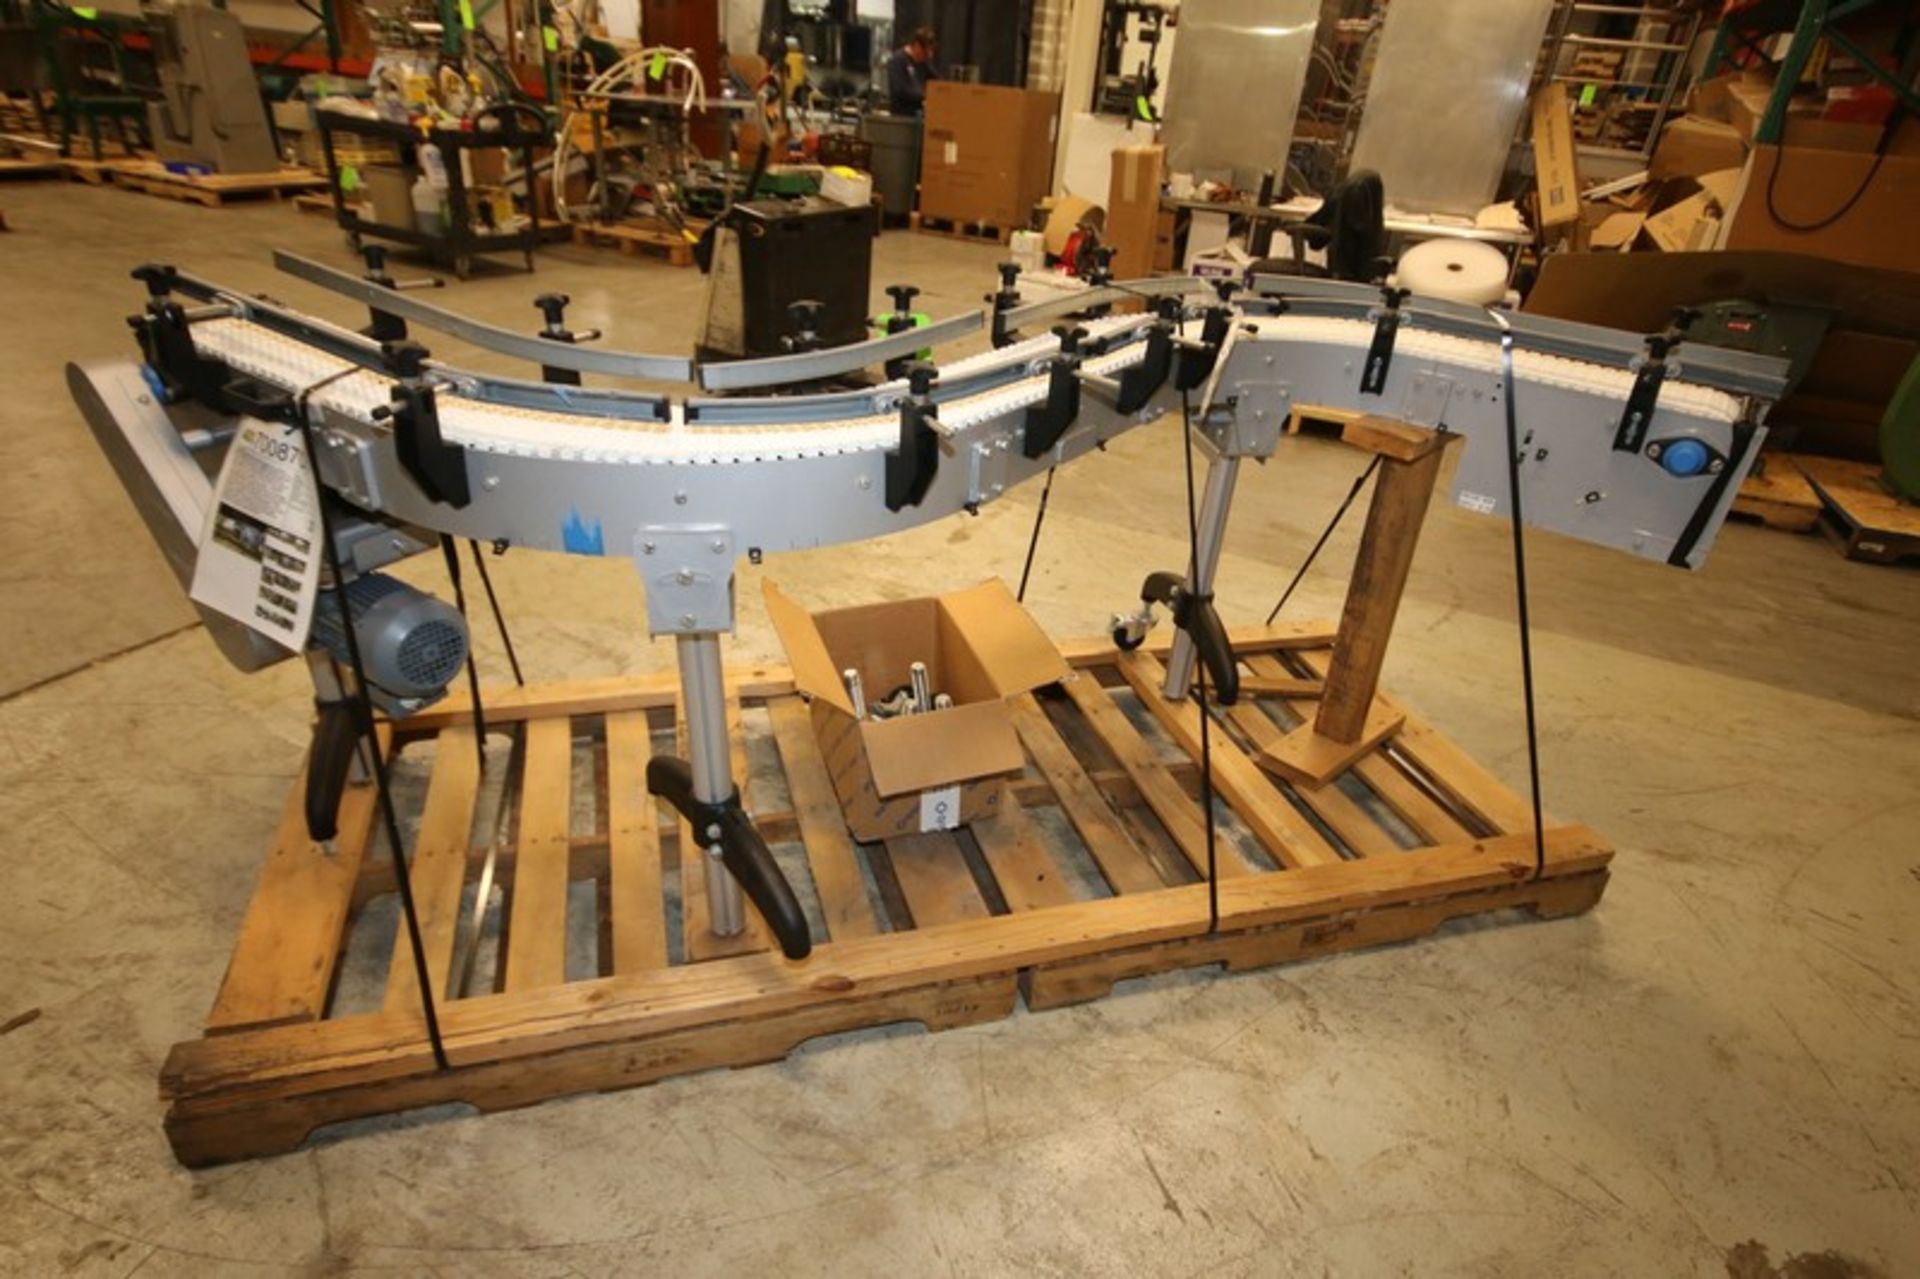 Like New Aprox. 10' L x 7" W x 36" H S Configuration Production Conveyor with Intralox Plastic Belt, - Image 4 of 8